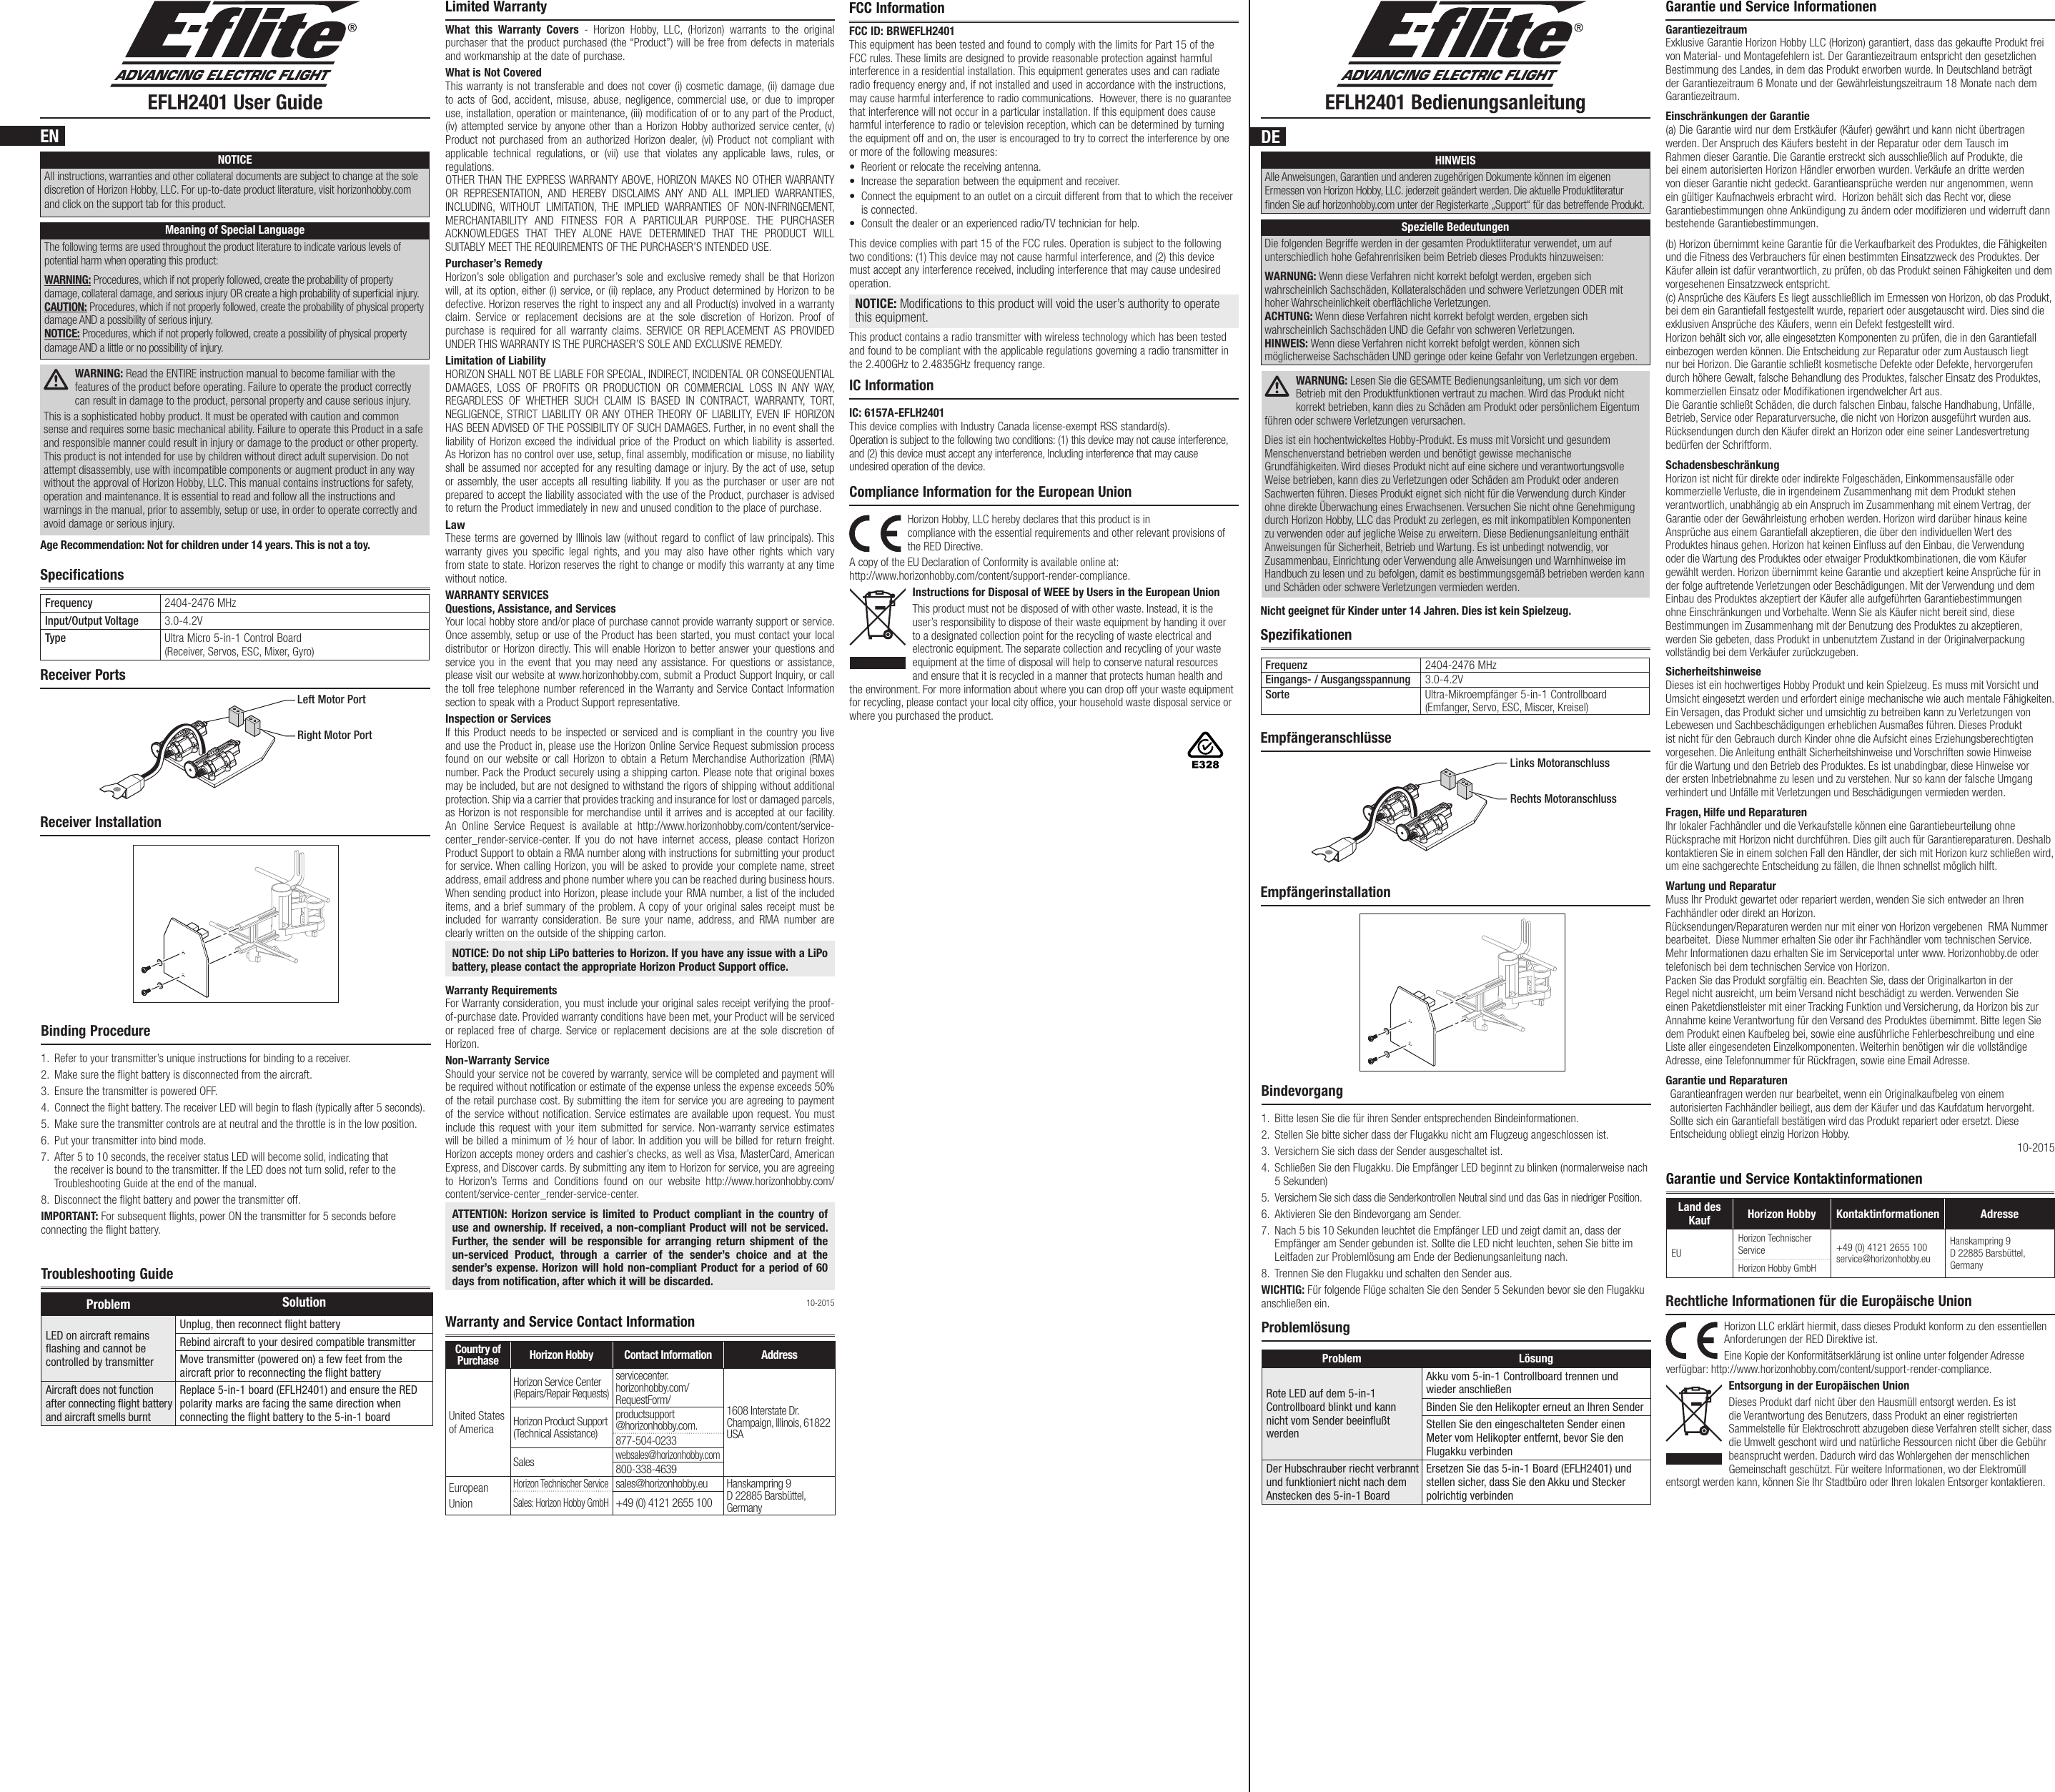 EFLH2401 User Guide EFLH2401 BedienungsanleitungEN DEDESpecificationsSpezifikationenNOTICEAll instructions, warranties and other collateral documents are subject to change at the sole discretion of Horizon Hobby, LLC. For up-to-date product literature, visit horizonhobby.com and click on the support tab for this product.Meaning of Special LanguageThe following terms are used throughout the product literature to indicate various levels of potential harm when operating this product:WARNING: Procedures, which if not properly followed, create the probability of property damage, collateral damage, and serious injury OR create a high probability of supercial injury. CAUTION: Procedures, which if not properly followed, create the probability of physical property damage AND a possibility of serious injury. NOTICE: Procedures, which if not properly followed, create a possibility of physical property damage AND a little or no possibility of injury. WARNING: Read the ENTIRE instruction manual to become familiar with the features of the product before operating. Failure to operate the product correctly can result in damage to the product, personal property and cause serious injury.This is a sophisticated hobby product. It must be operated with caution and common sense and requires some basic mechanical ability. Failure to operate this Product in a safe and responsible manner could result in injury or damage to the product or other property. This product is not intended for use by children without direct adult supervision. Do not attempt disassembly, use with incompatible components or augment product in any way without the approval of Horizon Hobby, LLC. This manual contains instructions for safety, operation and maintenance. It is essential to read and follow all the instructions and warnings in the manual, prior to assembly, setup or use, in order to operate correctly and avoid damage or serious injury.Age Recommendation: Not for children under 14 years. This is not a toy.Frequency 2404-2476 MHzInput/Output Voltage 3.0-4.2VType Ultra Micro 5-in-1 Control Board (Receiver, Servos, ESC, Mixer, Gyro)Frequenz 2404-2476 MHzEingangs- / Ausgangsspannung 3.0-4.2VSorte Ultra-Mikroempfänger 5-in-1 Controllboard (Emfanger, Servo, ESC, Miscer, Kreisel)Receiver PortsEmpfängeranschlüsseBinding Procedure1.  Refer to your transmitter’s unique instructions for binding to a receiver.2.  Make sure the ight battery is disconnected from the aircraft.3.  Ensure the transmitter is powered OFF.4.  Connect the ight battery. The receiver LED will begin to ash (typically after 5 seconds).5.  Make sure the transmitter controls are at neutral and the throttle is in the low position.6.  Put your transmitter into bind mode.7.  After 5 to 10 seconds, the receiver status LED will become solid, indicating that the receiver is bound to the transmitter. If the LED does not turn solid, refer to the Troubleshooting Guide at the end of the manual.8.  Disconnect the ight battery and power the transmitter off.IMPORTANT: For subsequent ights, power ON the transmitter for 5 seconds before connecting the ight battery.Bindevorgang1.  Bitte lesen Sie die für ihren Sender entsprechenden Bindeinformationen.2.  Stellen Sie bitte sicher dass der Flugakku nicht am Flugzeug angeschlossen ist.3.  Versichern Sie sich dass der Sender ausgeschaltet ist.4.  Schließen Sie den Flugakku. Die Empfänger LED beginnt zu blinken (normalerweise nach 5 Sekunden)5.  Versichern Sie sich dass die Senderkontrollen Neutral sind und das Gas in niedriger Position.6.  Aktivieren Sie den Bindevorgang am Sender.7.  Nach 5 bis 10 Sekunden leuchtet die Empfänger LED und zeigt damit an, dass der Empfänger am Sender gebunden ist. Sollte die LED nicht leuchten, sehen Sie bitte im Leitfaden zur Problemlösung am Ende der Bedienungsanleitung nach.8.  Trennen Sie den Flugakku und schalten den Sender aus.WICHTIG: Für folgende Flüge schalten Sie den Sender 5 Sekunden bevor sie den Flugakku anschließen ein.Receiver InstallationRight Motor PortLeft Motor PortProblem SolutionLED on aircraft remains ﬂashing and cannot be controlled by transmitterUnplug, then reconnect ﬂight batteryRebind aircraft to your desired compatible transmitterMove transmitter (powered on) a few feet from the aircraft prior to reconnecting the ﬂight batteryAircraft does not function after connecting ﬂight battery and aircraft smells burntReplace 5-in-1 board (EFLH2401) and ensure the RED polarity marks are facing the same direction when connecting the ﬂight battery to the 5-in-1 boardTroubleshooting GuideProblemlösungLimited WarrantyWhat this Warranty Covers - Horizon Hobby, LLC, (Horizon) warrants to the original purchaser that the product purchased (the “Product”) will be free from defects in materials and workmanship at the date of purchase.What is Not CoveredThis warranty is not transferable and does not cover (i) cosmetic damage, (ii) damage due to acts of God, accident, misuse, abuse, negligence, commercial use, or due to improper use, installation, operation or maintenance, (iii) modification of or to any part of the Product, (iv) attempted service by anyone other than a Horizon Hobby authorized service center, (v) Product not purchased from an authorized Horizon dealer, (vi) Product not compliant with applicable technical regulations, or (vii) use that violates any applicable laws, rules, or regulations. OTHER THAN THE EXPRESS WARRANTY ABOVE, HORIZON MAKES NO OTHER WARRANTY OR REPRESENTATION, AND HEREBY DISCLAIMS ANY AND ALL IMPLIED WARRANTIES, INCLUDING, WITHOUT LIMITATION, THE IMPLIED WARRANTIES OF NON-INFRINGEMENT, MERCHANTABILITY AND FITNESS FOR A PARTICULAR PURPOSE. THE PURCHASER ACKNOWLEDGES THAT THEY ALONE HAVE DETERMINED THAT THE PRODUCT WILL SUITABLY MEET THE REQUIREMENTS OF THE PURCHASER’S INTENDED USE. Purchaser’s RemedyHorizon’s sole obligation and purchaser’s sole and exclusive remedy shall be that Horizon will, at its option, either (i) service, or (ii) replace, any Product determined by Horizon to be defective. Horizon reserves the right to inspect any and all Product(s) involved in a warranty claim. Service or replacement decisions are at the sole discretion of Horizon. Proof of purchase is required for all warranty claims. SERVICE OR REPLACEMENT AS PROVIDED UNDER THIS WARRANTY IS THE PURCHASER’S SOLE AND EXCLUSIVE REMEDY. Limitation of LiabilityHORIZON SHALL NOT BE LIABLE FOR SPECIAL, INDIRECT, INCIDENTAL OR CONSEQUENTIAL DAMAGES, LOSS OF PROFITS OR PRODUCTION OR COMMERCIAL LOSS IN ANY WAY, REGARDLESS OF WHETHER SUCH CLAIM IS BASED IN CONTRACT, WARRANTY, TORT, NEGLIGENCE, STRICT LIABILITY OR ANY OTHER THEORY OF LIABILITY, EVEN IF HORIZON HAS BEEN ADVISED OF THE POSSIBILITY OF SUCH DAMAGES. Further, in no event shall the liability of Horizon exceed the individual price of the Product on which liability is asserted. As Horizon has no control over use, setup, final assembly, modification or misuse, no liability shall be assumed nor accepted for any resulting damage or injury. By the act of use, setup or assembly, the user accepts all resulting liability. If you as the purchaser or user are not prepared to accept the liability associated with the use of the Product, purchaser is advised to return the Product immediately in new and unused condition to the place of purchase.LawThese terms are governed by Illinois law (without regard to conflict of law principals). This warranty gives you specific legal rights, and you may also have other rights which vary from state to state. Horizon reserves the right to change or modify this warranty at any time without notice.WARRANTY SERVICESQuestions, Assistance, and ServicesYour local hobby store and/or place of purchase cannot provide warranty support or service. Once assembly, setup or use of the Product has been started, you must contact your local distributor or Horizon directly. This will enable Horizon to better answer your questions and service you in the event that you may need any assistance. For questions or assistance, please visit our website at www.horizonhobby.com, submit a Product Support Inquiry, or call the toll free telephone number referenced in the Warranty and Service Contact Information section to speak with a Product Support representative. Inspection or ServicesIf this Product needs to be inspected or serviced and is compliant in the country you live and use the Product in, please use the Horizon Online Service Request submission process found on our website or call Horizon to obtain a Return Merchandise Authorization (RMA) number. Pack the Product securely using a shipping carton. Please note that original boxes may be included, but are not designed to withstand the rigors of shipping without additional protection. Ship via a carrier that provides tracking and insurance for lost or damaged parcels, as Horizon is not responsible for merchandise until it arrives and is accepted at our facility. An Online Service Request is available at http://www.horizonhobby.com/content/service-center_render-service-center. If you do not have internet access, please contact Horizon Product Support to obtain a RMA number along with instructions for submitting your product for service. When calling Horizon, you will be asked to provide your complete name, street address, email address and phone number where you can be reached during business hours. When sending product into Horizon, please include your RMA number, a list of the included items, and a brief summary of the problem. A copy of your original sales receipt must be included for warranty consideration. Be sure your name, address, and RMA number are clearly written on the outside of the shipping carton. NOTICE: Do not ship LiPo batteries to Horizon. If you have any issue with a LiPo battery, please contact the appropriate Horizon Product Support office.Warranty Requirements For Warranty consideration, you must include your original sales receipt verifying the proof-of-purchase date. Provided warranty conditions have been met, your Product will be serviced or replaced free of charge. Service or replacement decisions are at the sole discretion of Horizon.Non-Warranty ServiceShould your service not be covered by warranty, service will be completed and payment will be required without notification or estimate of the expense unless the expense exceeds 50% of the retail purchase cost. By submitting the item for service you are agreeing to payment of the service without notification. Service estimates are available upon request. You must include this request with your item submitted for service. Non-warranty service estimates will be billed a minimum of ½ hour of labor. In addition you will be billed for return freight. Horizon accepts money orders and cashier’s checks, as well as Visa, MasterCard, American Express, and Discover cards. By submitting any item to Horizon for service, you are agreeing to Horizon’s Terms and Conditions found on our website http://www.horizonhobby.com/content/service-center_render-service-center.ATTENTION: Horizon service is limited to Product compliant in the country of use and ownership. If received, a non-compliant Product will not be serviced. Further, the sender will be responsible for arranging return shipment of the un-serviced Product, through a carrier of the sender’s choice and at the sender’s expense. Horizon will hold non-compliant Product for a period of 60 days from notification, after which it will be discarded. 10-2015Garantie und Service InformationenGarantiezeitraum Exklusive Garantie Horizon Hobby LLC (Horizon) garantiert, dass das gekaufte Produkt frei von Material- und Montagefehlern ist. Der Garantiezeitraum entspricht den gesetzlichen Bestimmung des Landes, in dem das Produkt erworben wurde. In Deutschland beträgt der Garantiezeitraum 6 Monate und der Gewährleistungszeitraum 18 Monate nach dem Garantiezeitraum.Einschränkungen der Garantie (a) Die Garantie wird nur dem Erstkäufer (Käufer) gewährt und kann nicht übertragen werden. Der Anspruch des Käufers besteht in der Reparatur oder dem Tausch im Rahmen dieser Garantie. Die Garantie erstreckt sich ausschließlich auf Produkte, die bei einem autorisierten Horizon Händler erworben wurden. Verkäufe an dritte werden von dieser Garantie nicht gedeckt. Garantieansprüche werden nur angenommen, wenn ein gültiger Kaufnachweis erbracht wird.  Horizon behält sich das Recht vor, diese Garantiebestimmungen ohne Ankündigung zu ändern oder modizieren und widerruft dann bestehende Garantiebestimmungen.(b) Horizon übernimmt keine Garantie für die Verkaufbarkeit des Produktes, die Fähigkeiten und die Fitness des Verbrauchers für einen bestimmten Einsatzzweck des Produktes. Der Käufer allein ist dafür verantwortlich, zu prüfen, ob das Produkt seinen Fähigkeiten und dem vorgesehenen Einsatzzweck entspricht. (c) Ansprüche des Käufers Es liegt ausschließlich im Ermessen von Horizon, ob das Produkt, bei dem ein Garantiefall festgestellt wurde, repariert oder ausgetauscht wird. Dies sind die exklusiven Ansprüche des Käufers, wenn ein Defekt festgestellt wird. Horizon behält sich vor, alle eingesetzten Komponenten zu prüfen, die in den Garantiefall einbezogen werden können. Die Entscheidung zur Reparatur oder zum Austausch liegt nur bei Horizon. Die Garantie schließt kosmetische Defekte oder Defekte, hervorgerufen durch höhere Gewalt, falsche Behandlung des Produktes, falscher Einsatz des Produktes, kommerziellen Einsatz oder Modikationen irgendwelcher Art aus. Die Garantie schließt Schäden, die durch falschen Einbau, falsche Handhabung, Unfälle, Betrieb, Service oder Reparaturversuche, die nicht von Horizon ausgeführt wurden aus. Rücksendungen durch den Käufer direkt an Horizon oder eine seiner Landesvertretung bedürfen der Schriftform.Schadensbeschränkung Horizon ist nicht für direkte oder indirekte Folgeschäden, Einkommensausfälle oder kommerzielle Verluste, die in irgendeinem Zusammenhang mit dem Produkt stehen verantwortlich, unabhängig ab ein Anspruch im Zusammenhang mit einem Vertrag, der Garantie oder der Gewährleistung erhoben werden. Horizon wird darüber hinaus keine Ansprüche aus einem Garantiefall akzeptieren, die über den individuellen Wert des Produktes hinaus gehen. Horizon hat keinen Einuss auf den Einbau, die Verwendung oder die Wartung des Produktes oder etwaiger Produktkombinationen, die vom Käufer gewählt werden. Horizon übernimmt keine Garantie und akzeptiert keine Ansprüche für in der folge auftretende Verletzungen oder Beschädigungen. Mit der Verwendung und dem Einbau des Produktes akzeptiert der Käufer alle aufgeführten Garantiebestimmungen ohne Einschränkungen und Vorbehalte. Wenn Sie als Käufer nicht bereit sind, diese Bestimmungen im Zusammenhang mit der Benutzung des Produktes zu akzeptieren, werden Sie gebeten, dass Produkt in unbenutztem Zustand in der Originalverpackung vollständig bei dem Verkäufer zurückzugeben.Sicherheitshinweise Dieses ist ein hochwertiges Hobby Produkt und kein Spielzeug. Es muss mit Vorsicht und Umsicht eingesetzt werden und erfordert einige mechanische wie auch mentale Fähigkeiten. Ein Versagen, das Produkt sicher und umsichtig zu betreiben kann zu Verletzungen von Lebewesen und Sachbeschädigungen erheblichen Ausmaßes führen. Dieses Produkt ist nicht für den Gebrauch durch Kinder ohne die Aufsicht eines Erziehungsberechtigten vorgesehen. Die Anleitung enthält Sicherheitshinweise und Vorschriften sowie Hinweise für die Wartung und den Betrieb des Produktes. Es ist unabdingbar, diese Hinweise vor der ersten Inbetriebnahme zu lesen und zu verstehen. Nur so kann der falsche Umgang verhindert und Unfälle mit Verletzungen und Beschädigungen vermieden werden.Fragen, Hilfe und Reparaturen Ihr lokaler Fachhändler und die Verkaufstelle können eine Garantiebeurteilung ohne Rücksprache mit Horizon nicht durchführen. Dies gilt auch für Garantiereparaturen. Deshalb kontaktieren Sie in einem solchen Fall den Händler, der sich mit Horizon kurz schließen wird, um eine sachgerechte Entscheidung zu fällen, die Ihnen schnellst möglich hilft.Wartung und Reparatur Muss Ihr Produkt gewartet oder repariert werden, wenden Sie sich entweder an Ihren Fachhändler oder direkt an Horizon. Rücksendungen/Reparaturen werden nur mit einer von Horizon vergebenen  RMA Nummer bearbeitet.  Diese Nummer erhalten Sie oder ihr Fachhändler vom technischen Service. Mehr Informationen dazu erhalten Sie im Serviceportal unter www. Horizonhobby.de oder telefonisch bei dem technischen Service von Horizon.Packen Sie das Produkt sorgfältig ein. Beachten Sie, dass der Originalkarton in der Regel nicht ausreicht, um beim Versand nicht beschädigt zu werden. Verwenden Sie einen Paketdienstleister mit einer Tracking Funktion und Versicherung, da Horizon bis zur Annahme keine Verantwortung für den Versand des Produktes übernimmt. Bitte legen Sie dem Produkt einen Kaufbeleg bei, sowie eine ausführliche Fehlerbeschreibung und eine Liste aller eingesendeten Einzelkomponenten. Weiterhin benötigen wir die vollständige Adresse, eine Telefonnummer für Rückfragen, sowie eine Email Adresse.Garantie und Reparaturen Garantieanfragen werden nur bearbeitet, wenn ein Originalkaufbeleg von einem autorisierten Fachhändler beiliegt, aus dem der Käufer und das Kaufdatum hervorgeht. Sollte sich ein Garantiefall bestätigen wird das Produkt repariert oder ersetzt. Diese Entscheidung obliegt einzig Horizon Hobby.10-2015Warranty and Service Contact InformationCountry of Purchase Horizon Hobby Contact Information AddressUnited States of AmericaHorizon Service Center (Repairs/Repair Requests) servicecenter.horizonhobby.com/RequestForm/ 1608 Interstate Dr.  Champaign, Illinois, 61822 USAHorizon Product Support (Technical Assistance)productsupport @horizonhobby.com.877-504-0233Saleswebsales@horizonhobby.com800-338-4639EuropeanUnionHorizon Technischer Servicesales@horizonhobby.eu Hanskampring 9 D 22885 Barsbüttel, GermanySales: Horizon Hobby GmbH+49 (0) 4121 2655 100FCC InformationFCC ID: BRWEFLH2401This equipment has been tested and found to comply with the limits for Part 15 of the FCC rules. These limits are designed to provide reasonable protection against harmful interference in a residential installation. This equipment generates uses and can radiate radio frequency energy and, if not installed and used in accordance with the instructions, may cause harmful interference to radio communications.  However, there is no guarantee that interference will not occur in a particular installation. If this equipment does cause harmful interference to radio or television reception, which can be determined by turning the equipment off and on, the user is encouraged to try to correct the interference by one or more of the following measures:• Reorient or relocate the receiving antenna.• Increase the separation between the equipment and receiver.• Connect the equipment to an outlet on a circuit different from that to which the receiver is connected.• Consult the dealer or an experienced radio/TV technician for help.This device complies with part 15 of the FCC rules. Operation is subject to the following two conditions: (1) This device may not cause harmful interference, and (2) this device must accept any interference received, including interference that may cause undesired operation.NOTICE: Modications to this product will void the user’s authority to operate this equipment.This product contains a radio transmitter with wireless technology which has been tested and found to be compliant with the applicable regulations governing a radio transmitter in the 2.400GHz to 2.4835GHz frequency range.IC InformationIC: 6157A-EFLH2401This device complies with Industry Canada license-exempt RSS standard(s). Operation is subject to the following two conditions: (1) this device may not cause interference, and (2) this device must accept any interference, Including interference that may cause undesired operation of the device.Horizon Hobby, LLC hereby declares that this product is in  compliance with the essential requirements and other relevant provisions of the RED Directive. A copy of the EU Declaration of Conformity is available online at:  http://www.horizonhobby.com/content/support-render-compliance. Instructions for Disposal of WEEE by Users in the European UnionThis product must not be disposed of with other waste. Instead, it is the user’sresponsibility to dispose of their waste equipment by handing it over to adesignated collection point for the recycling of waste electrical and electronic equipment. The separate collection and recycling of your waste equipment at the time of disposal will help to conserve natural resources and ensure that it is recycled in amanner that protects human health and the environment. For more information about where you can drop off your waste equipment for recycling, please contact your local city ofce, your household waste disposal service or where you purchased the product.Compliance Information for the European UnionNicht geeignet für Kinder unter 14 Jahren. Dies ist kein Spielzeug.Spezielle BedeutungenDie folgenden Begriffe werden in der gesamten Produktliteratur verwendet, um auf unterschiedlich hohe Gefahrenrisiken beim Betrieb dieses Produkts hinzuweisen:WARNUNG: Wenn diese Verfahren nicht korrekt befolgt werden, ergeben sich wahrscheinlich Sachschäden, Kollateralschäden und schwere Verletzungen ODER mit hoher Wahrscheinlichkeit oberächliche Verletzungen. ACHTUNG: Wenn diese Verfahren nicht korrekt befolgt werden, ergeben sich wahrscheinlich Sachschäden UND die Gefahr von schweren Verletzungen. HINWEIS: Wenn diese Verfahren nicht korrekt befolgt werden, können sich möglicherweise Sachschäden UND geringe oder keine Gefahr von Verletzungen ergeben.HINWEISAlle Anweisungen, Garantien und anderen zugehörigen Dokumente können im eigenen Ermessen von Horizon Hobby, LLC. jederzeit geändert werden. Die aktuelle Produktliteratur nden Sie auf horizonhobby.com unter der Registerkarte „Support“ für das betreffende Produkt.WARNUNG: Lesen Sie die GESAMTE Bedienungsanleitung, um sich vor dem Betrieb mit den Produktfunktionen vertraut zu machen. Wird das Produkt nicht korrekt betrieben, kann dies zu Schäden am Produkt oder persönlichem Eigentum führen oder schwere Verletzungen verursachen.Dies ist ein hochentwickeltes Hobby-Produkt. Es muss mit Vorsicht und gesundem Menschenverstand betrieben werden und benötigt gewisse mechanische Grundfähigkeiten. Wird dieses Produkt nicht auf eine sichere und verantwortungsvolle Weise betrieben, kann dies zu Verletzungen oder Schäden am Produkt oder anderen Sachwerten führen. Dieses Produkt eignet sich nicht für die Verwendung durch Kinder ohne direkte Überwachung eines Erwachsenen. Versuchen Sie nicht ohne Genehmigung durch Horizon Hobby, LLC das Produkt zu zerlegen, es mit inkompatiblen Komponenten zu verwenden oder auf jegliche Weise zu erweitern. Diese Bedienungsanleitung enthält Anweisungen für Sicherheit, Betrieb und Wartung. Es ist unbedingt notwendig, vor Zusammenbau, Einrichtung oder Verwendung alle Anweisungen und Warnhinweise im Handbuch zu lesen und zu befolgen, damit es bestimmungsgemäß betrieben werden kann und Schäden oder schwere Verletzungen vermieden werden.Problem LösungRote LED auf dem 5-in-1 Controllboard blinkt und kann nicht vom Sender beeinﬂußt werdenAkku vom 5-in-1 Controllboard trennen und wieder anschließenBinden Sie den Helikopter erneut an Ihren SenderStellen Sie den eingeschalteten Sender einen Meter vom Helikopter entfernt, bevor Sie den Flugakku verbindenDer Hubschrauber riecht verbrannt und funktioniert nicht nach dem Anstecken des 5-in-1 BoardErsetzen Sie das 5-in-1 Board (EFLH2401) und stellen sicher, dass Sie den Akku und Stecker polrichtig verbindenGarantie und Service KontaktinformationenHorizon LLC erklärt hiermit, dass dieses Produkt konform zu den essentiellen Anforderungen der RED Direktive ist. Eine Kopie der Konformitätserklärung ist online unter folgender Adresse verfügbar: http://www.horizonhobby.com/content/support-render-compliance.Entsorgung in der Europäischen UnionDieses Produkt darf nicht über den Hausmüll entsorgt werden. Es ist die Verantwortung des Benutzers, dass Produkt an einer registrierten Sammelstelle für Elektroschrott abzugeben diese Verfahren stellt sicher, dass die Umwelt geschont wird und natürliche Ressourcen nicht über die Gebühr beansprucht werden. Dadurch wird das Wohlergehen der menschlichen Gemeinschaft geschützt. Für weitere Informationen, wo der Elektromüll entsorgt werden kann, können Sie Ihr Stadtbüro oder Ihren lokalen Entsorger kontaktieren.Rechtliche Informationen für die Europäische UnionLand des Kauf Horizon Hobby Kontaktinformationen AdresseEUHorizon Technischer Service +49 (0) 4121 2655 100 service@horizonhobby.euHanskampring 9D 22885 Barsbüttel, GermanyHorizon Hobby GmbHEmpfängerinstallationLinks MotoranschlussRechts Motoranschluss